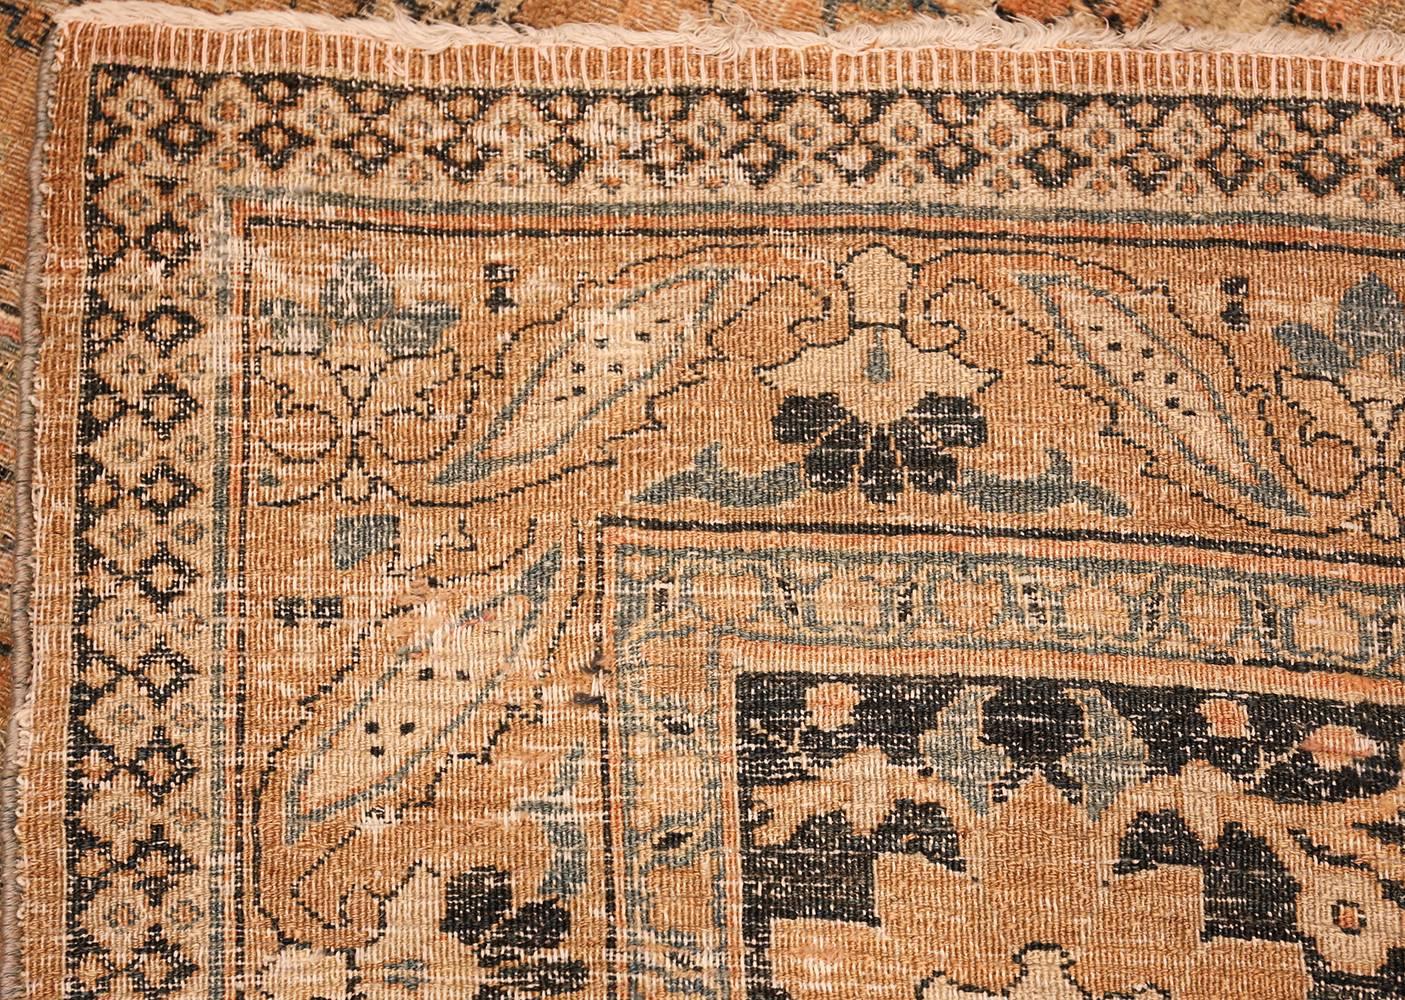 Breathtaking Oversized Antique Persian Khorassan Rug, Country of Origin / Rug Type: Persian Rug, Circa Date: 1920 – Size: 12 ft 4 in x 24 ft 6 in (3.76 m x 7.47 m).